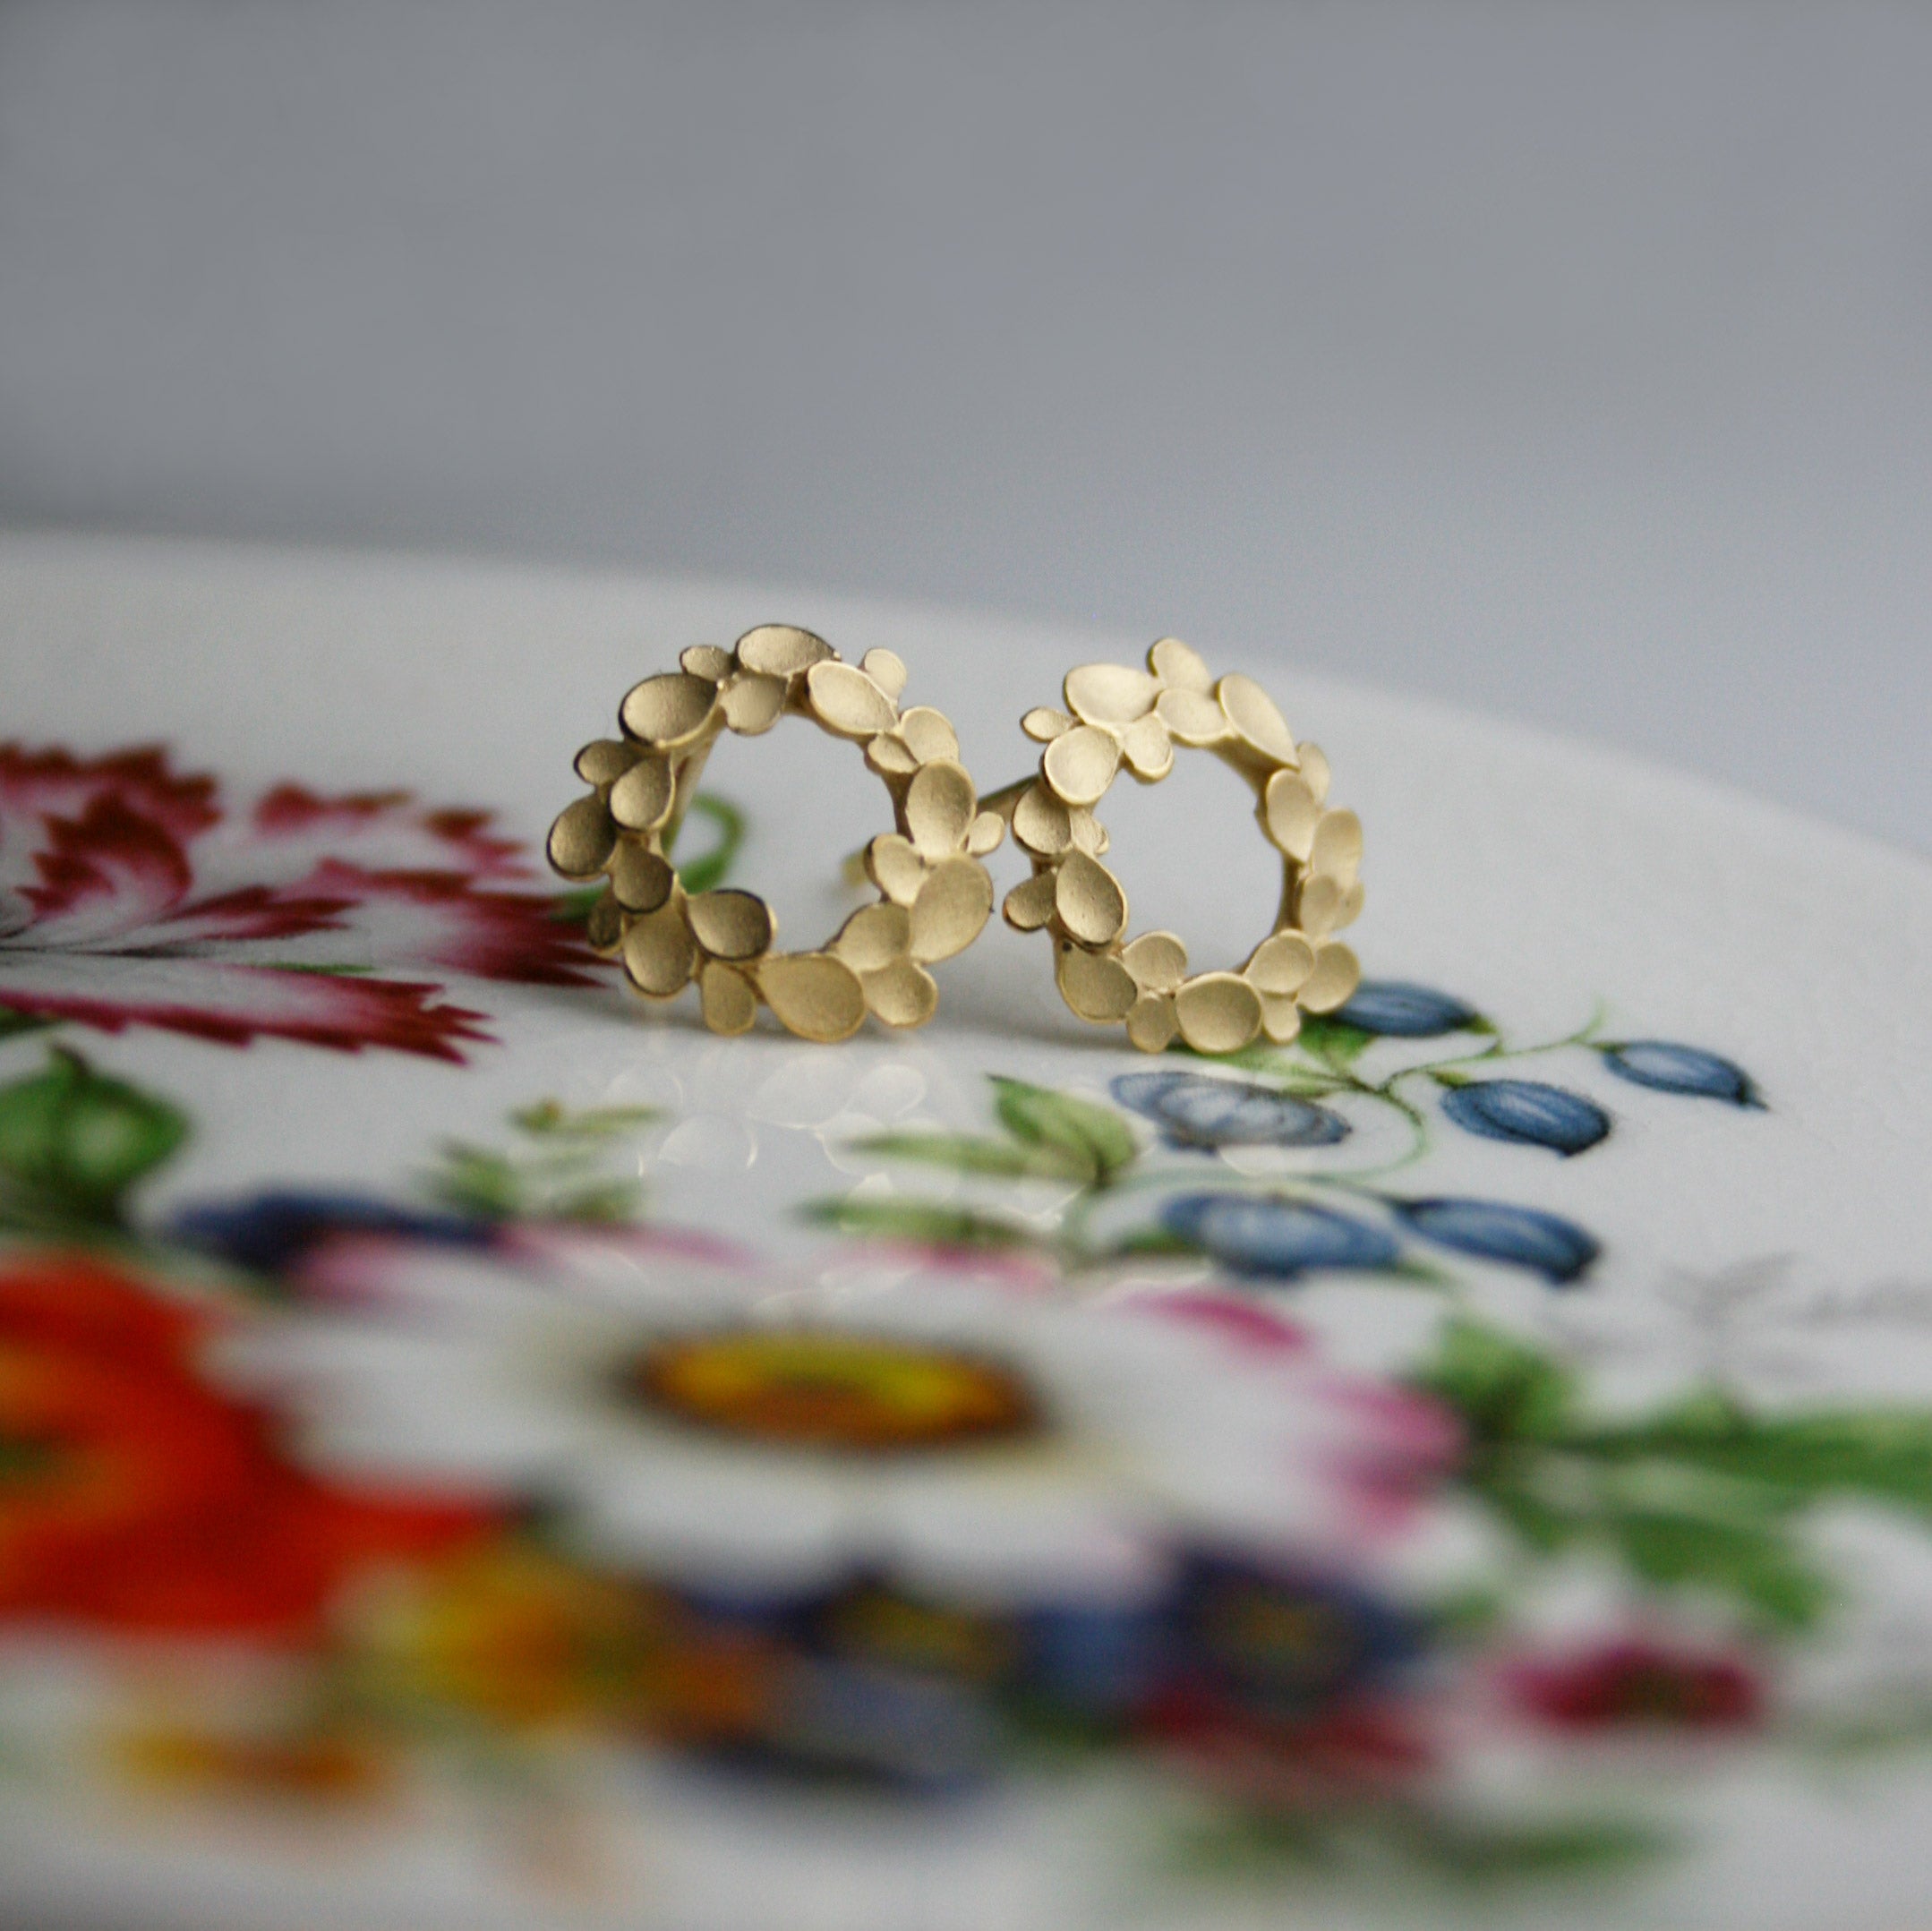 Floral wreath Silver gold-plated small Earstuds